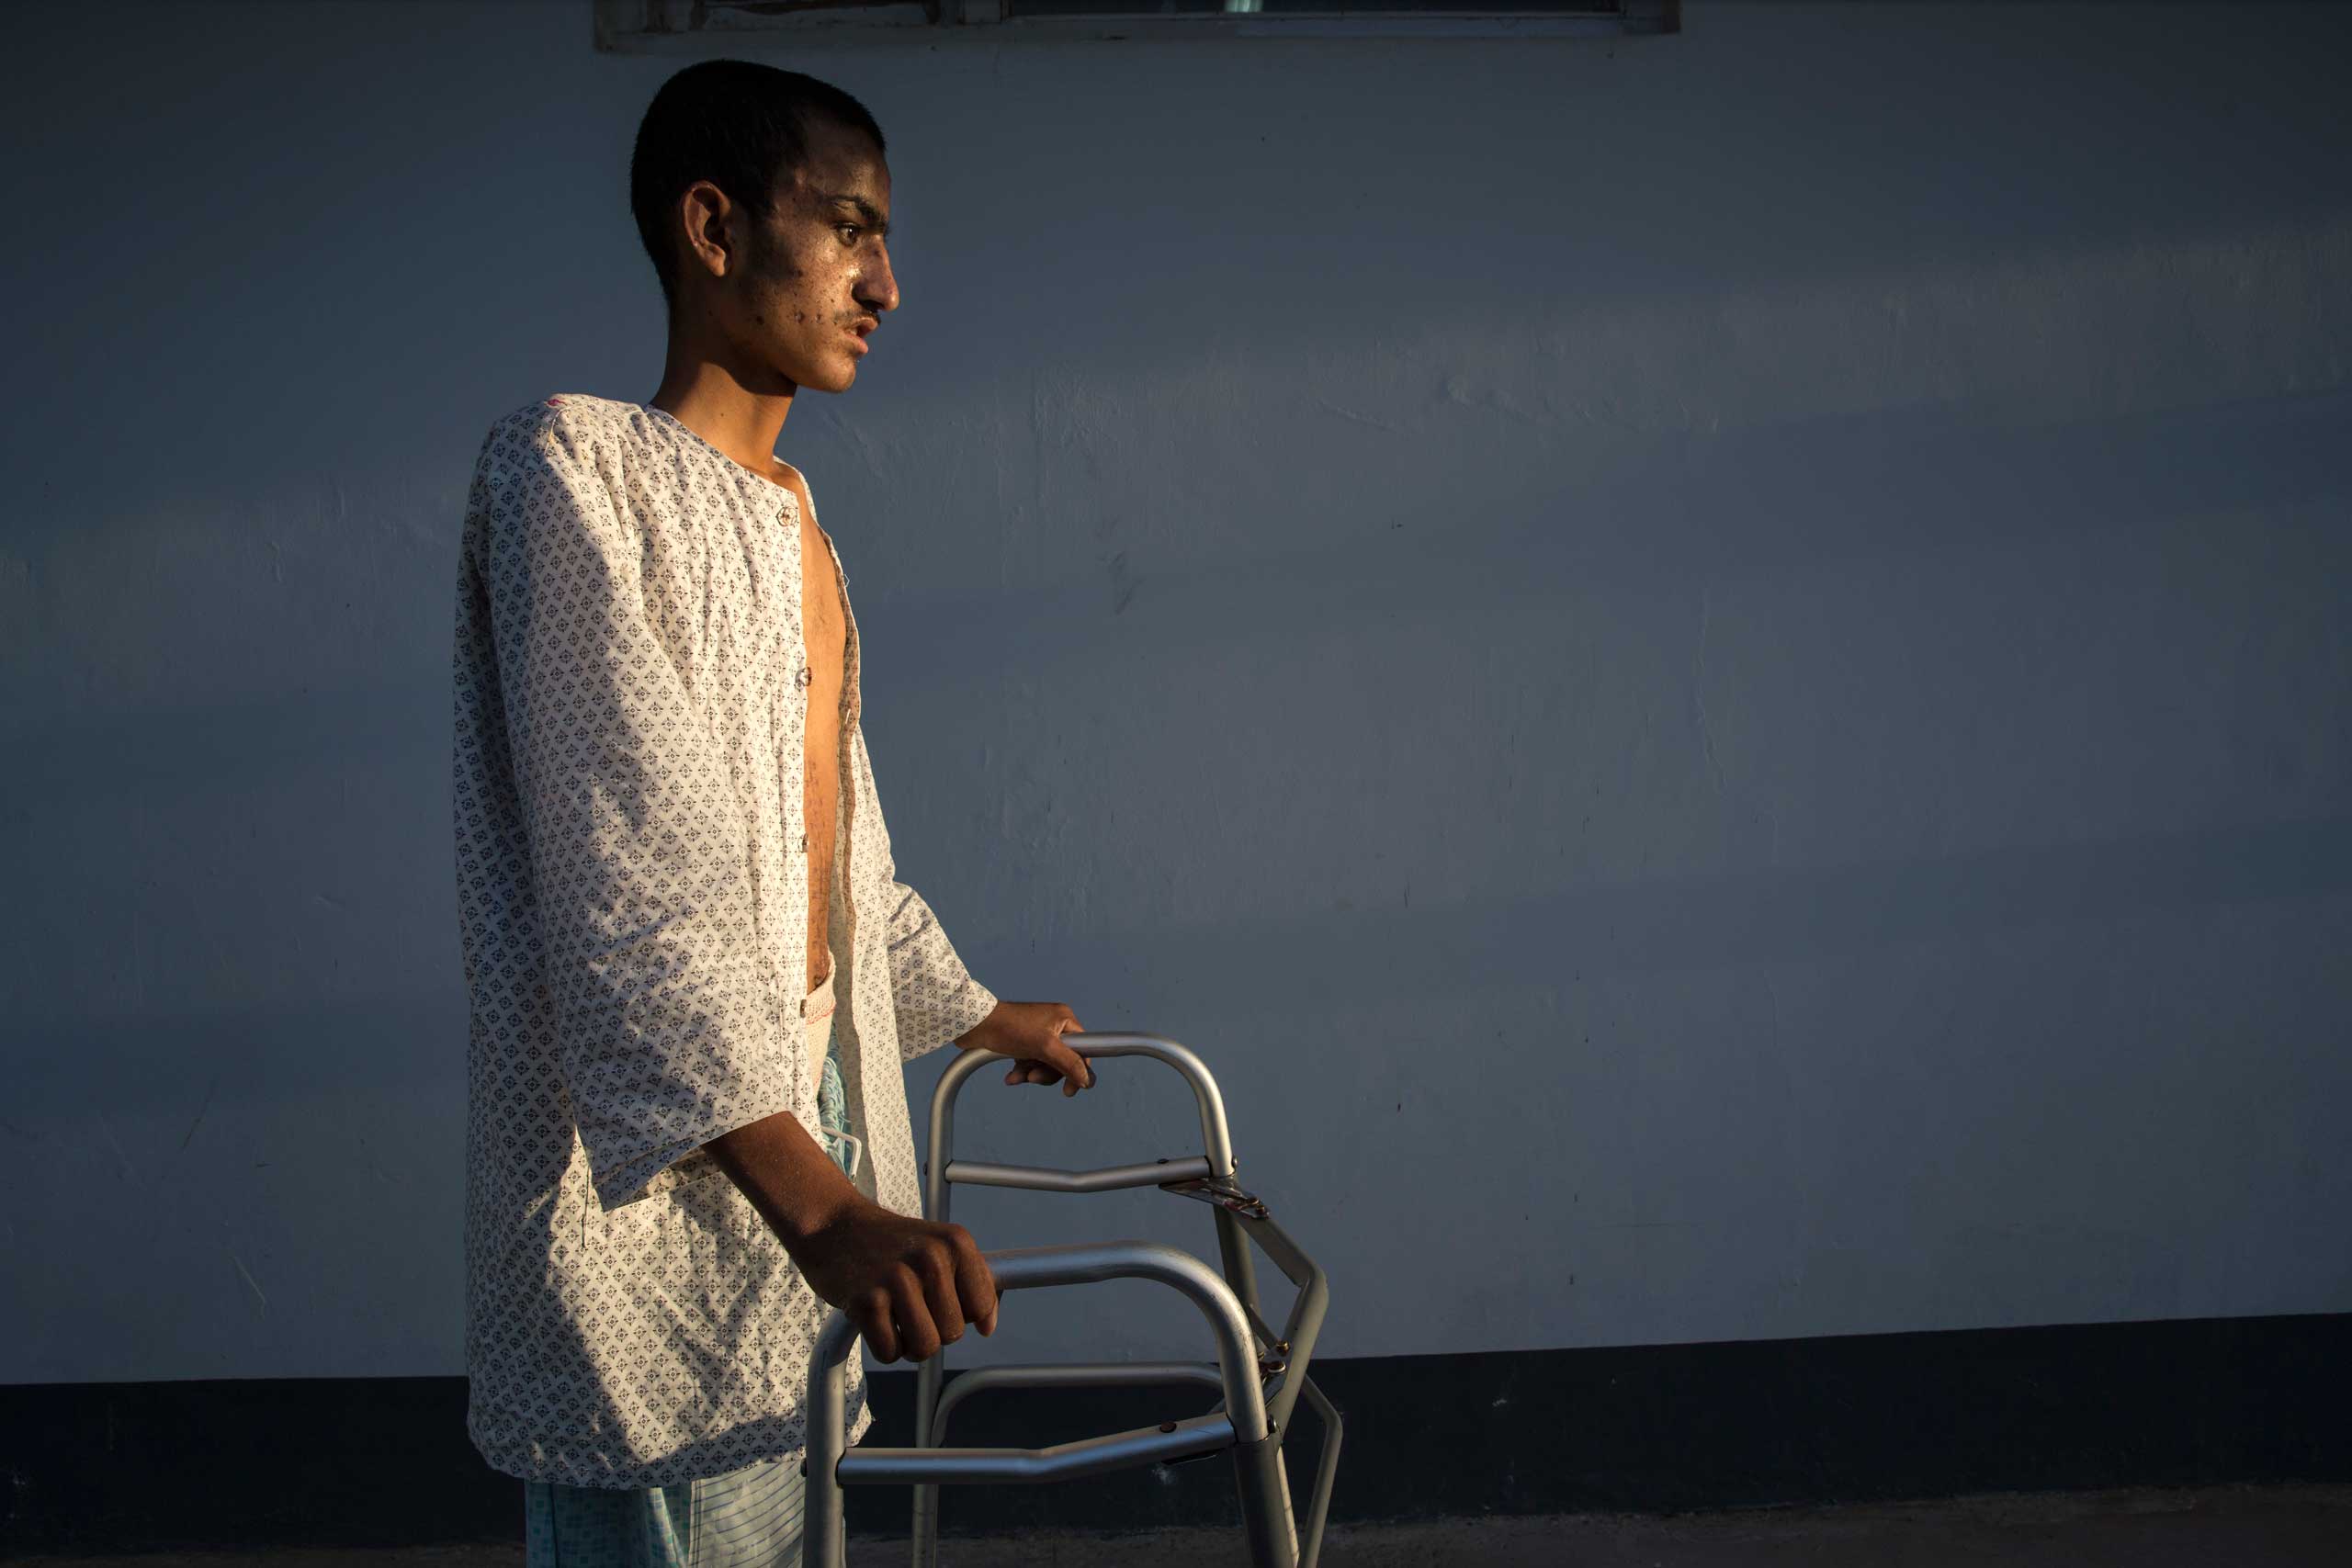 Ahah Kahn, 19, is barely able to walk after a serious brain injury caused by an IED. Atah was a sheep herder from Helmand who had been at the hospital for a month recovering his strength. Lashkar Gah, Afghanistan on March 26, 2015.